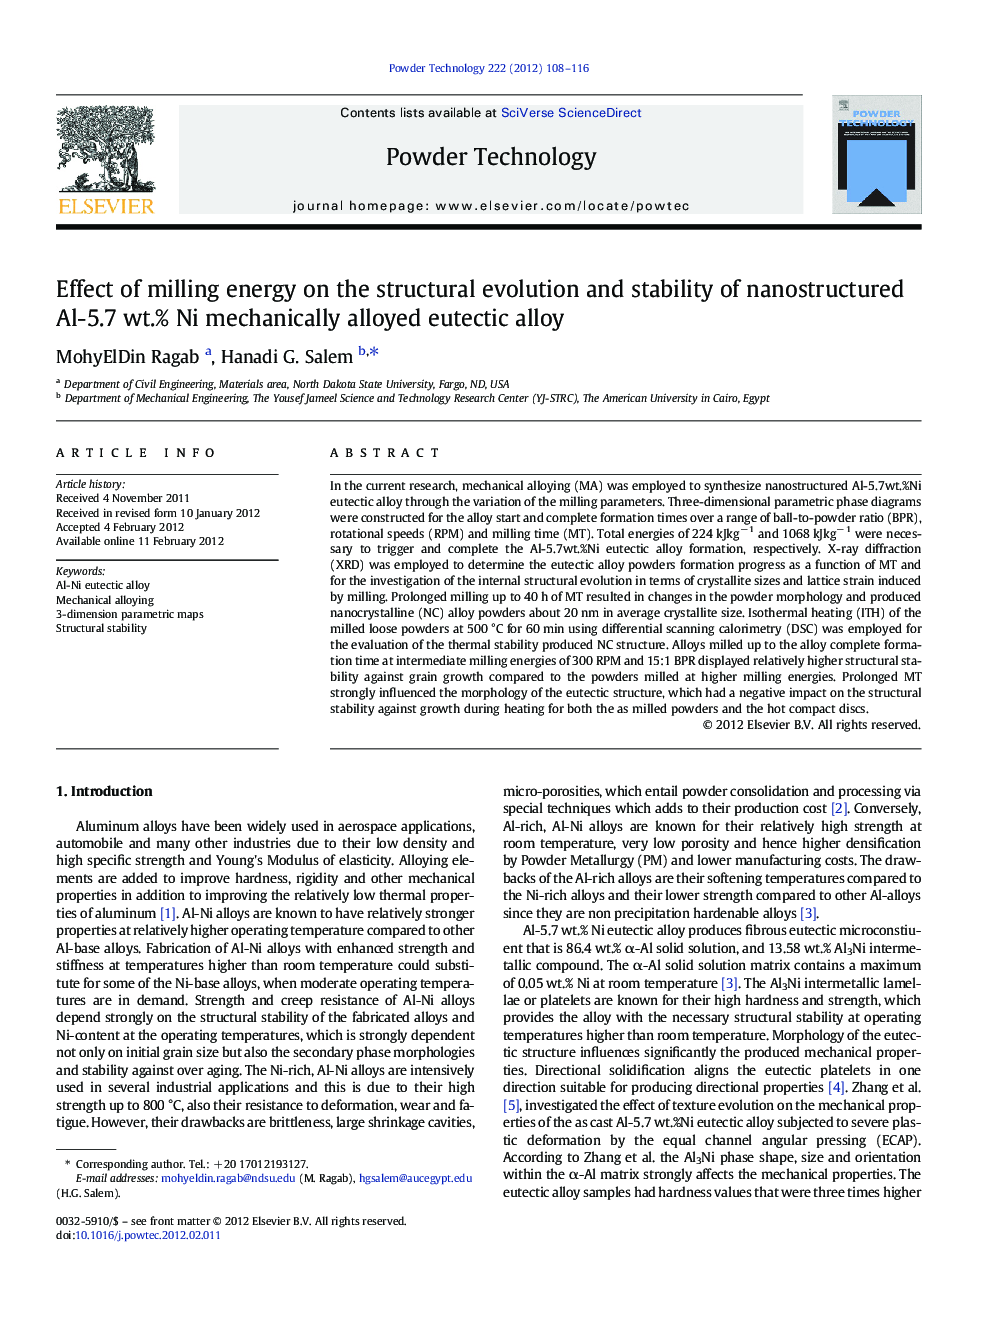 Effect of milling energy on the structural evolution and stability of nanostructured Al-5.7 wt.% Ni mechanically alloyed eutectic alloy